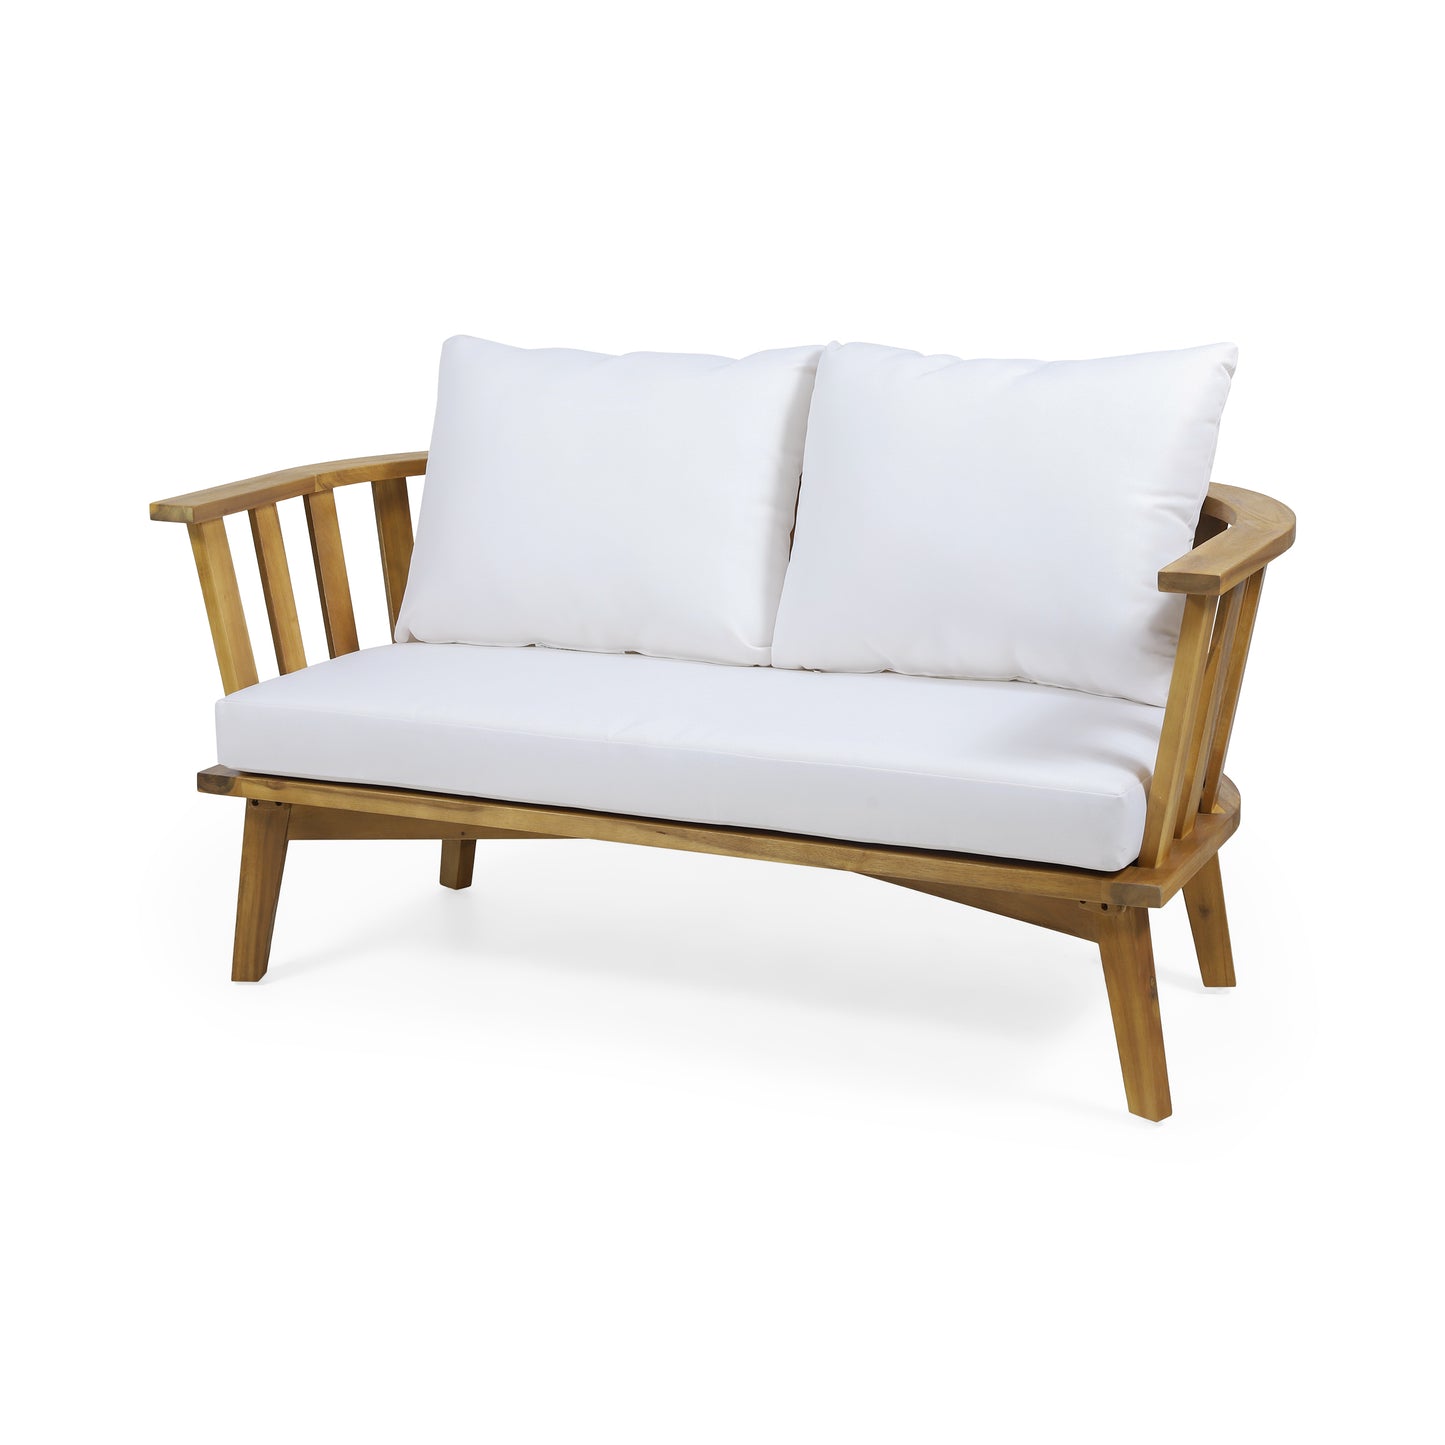 Laiah Outdoor Wooden Loveseat with Cushions